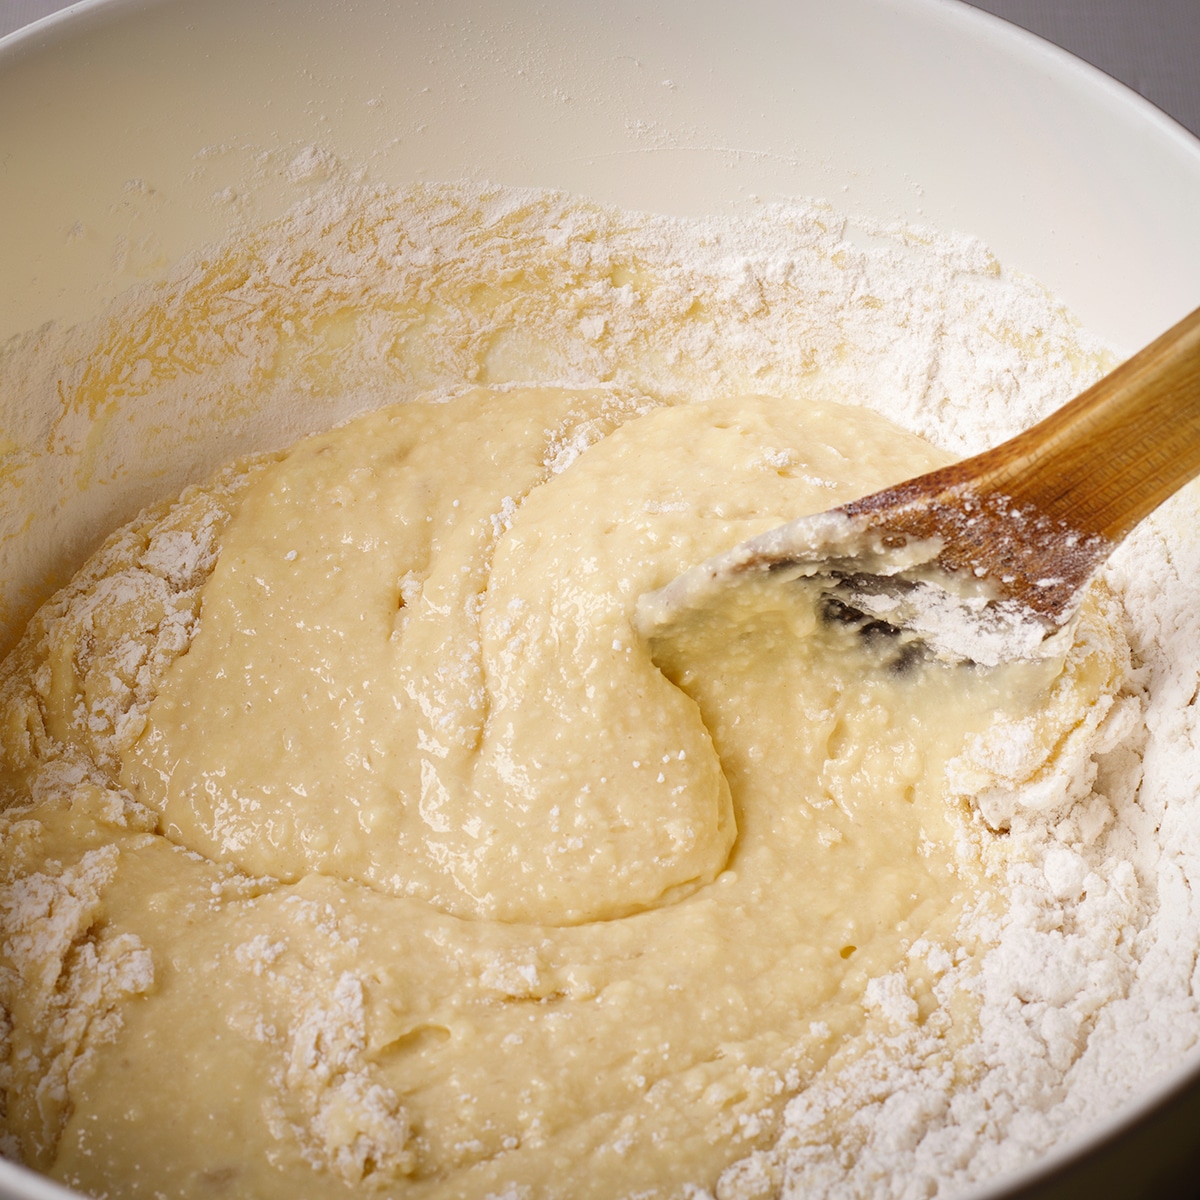 Using a wooden spoon to stir raspberry muffin batter.